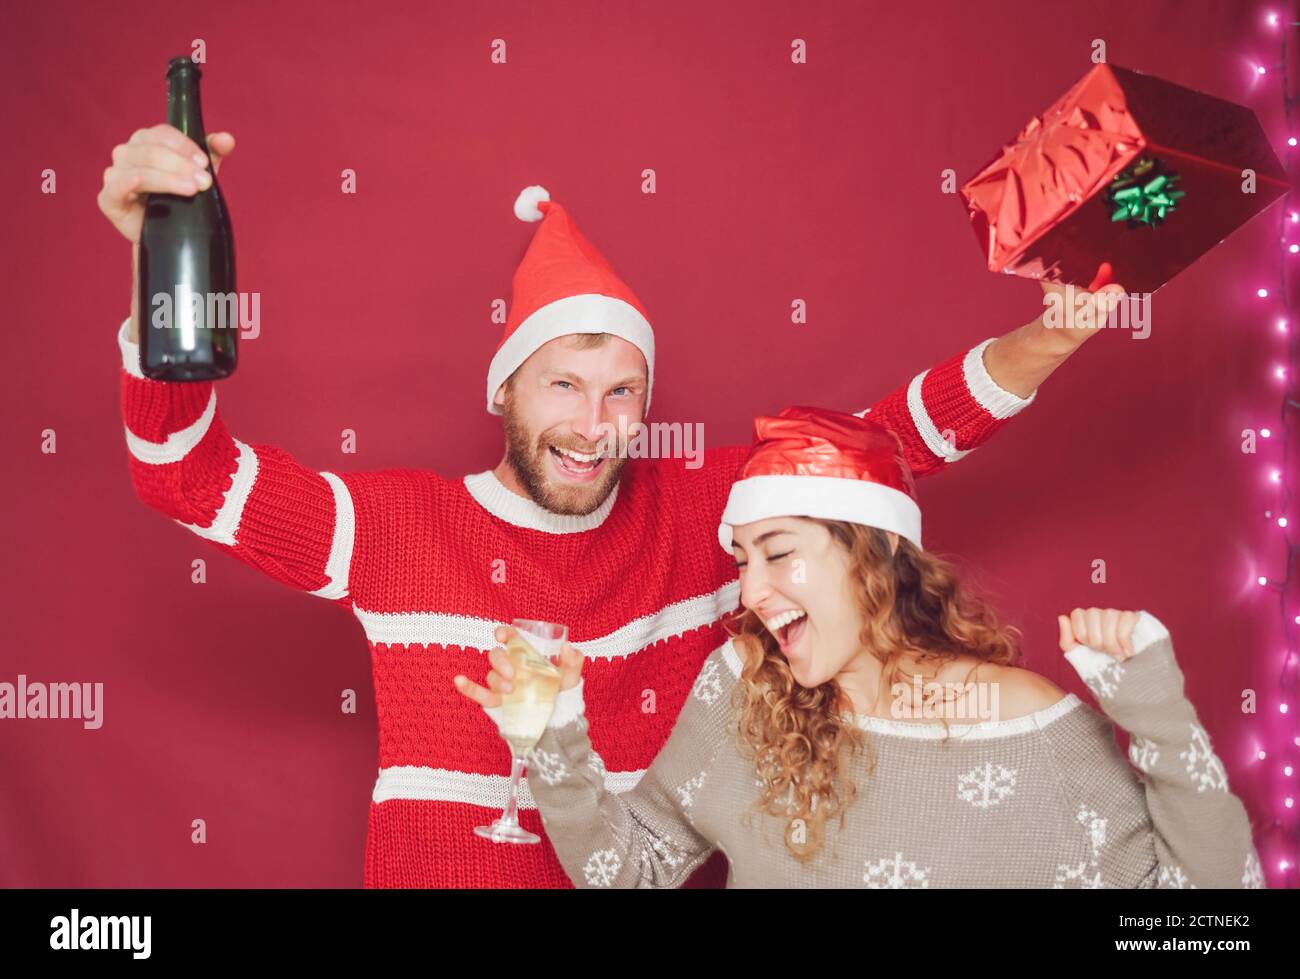 Happy couple celebrating Christmas holidays - Young people having fun drinking and laughing during xmas event Stock Photo